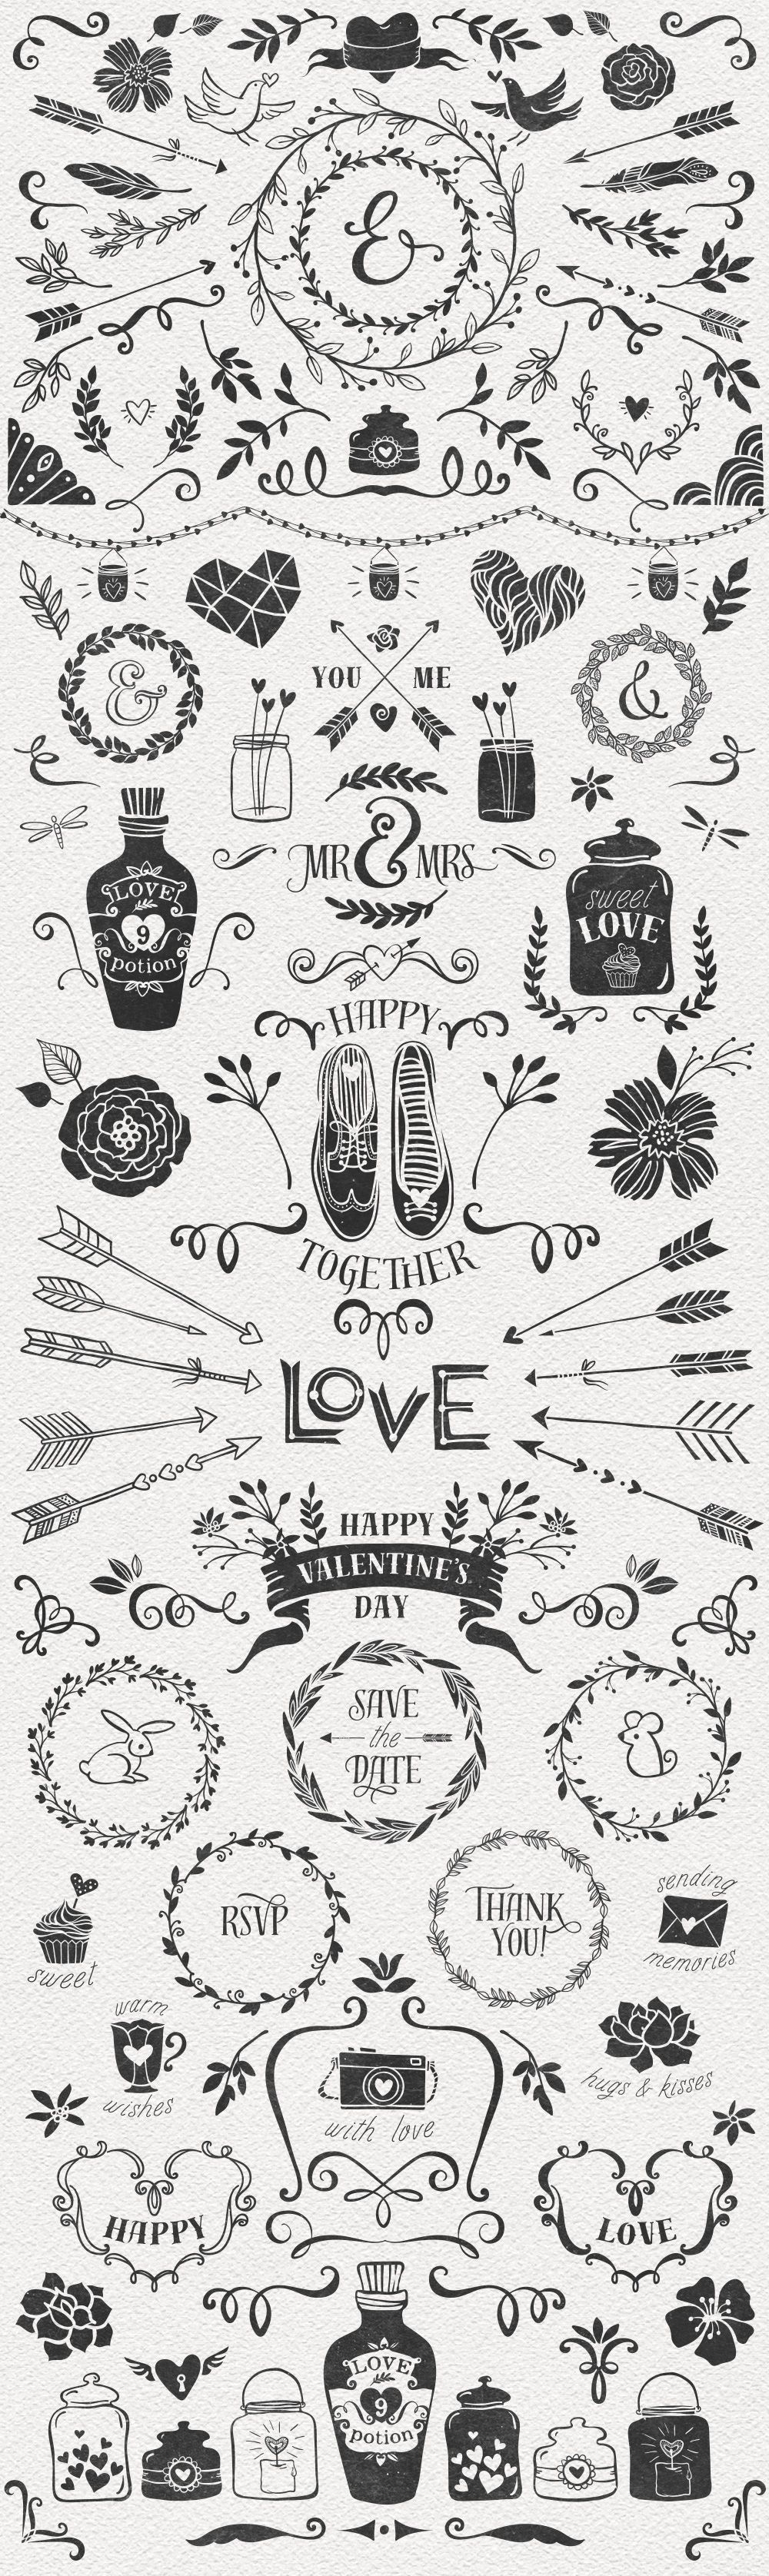 Hand Drawn Romantic Decoration Pack by kite-kit on @Creative Market